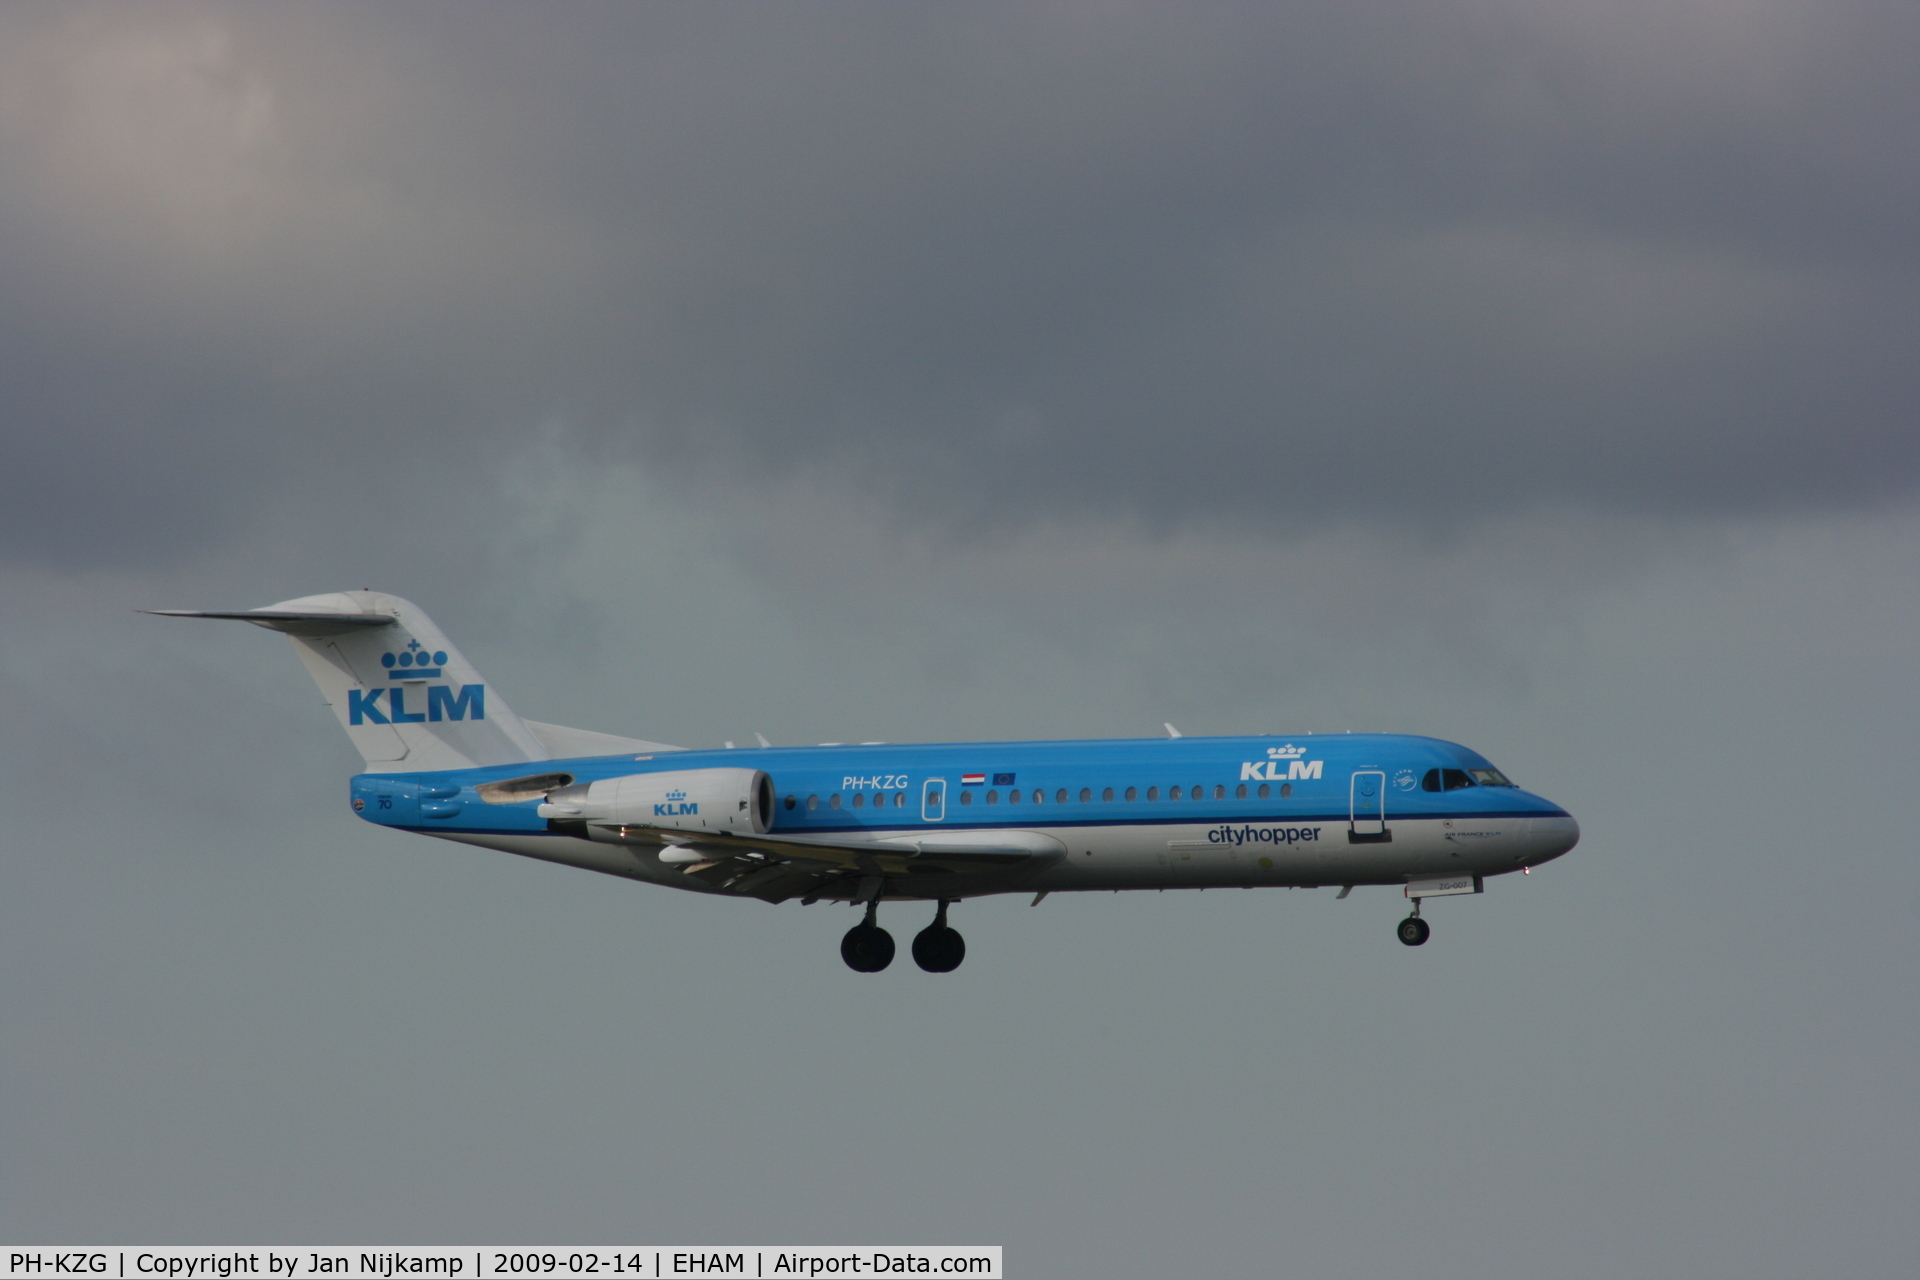 PH-KZG, 1996 Fokker 70 (F-28-0070) C/N 11578, Landing on the Kaagbaan from the south